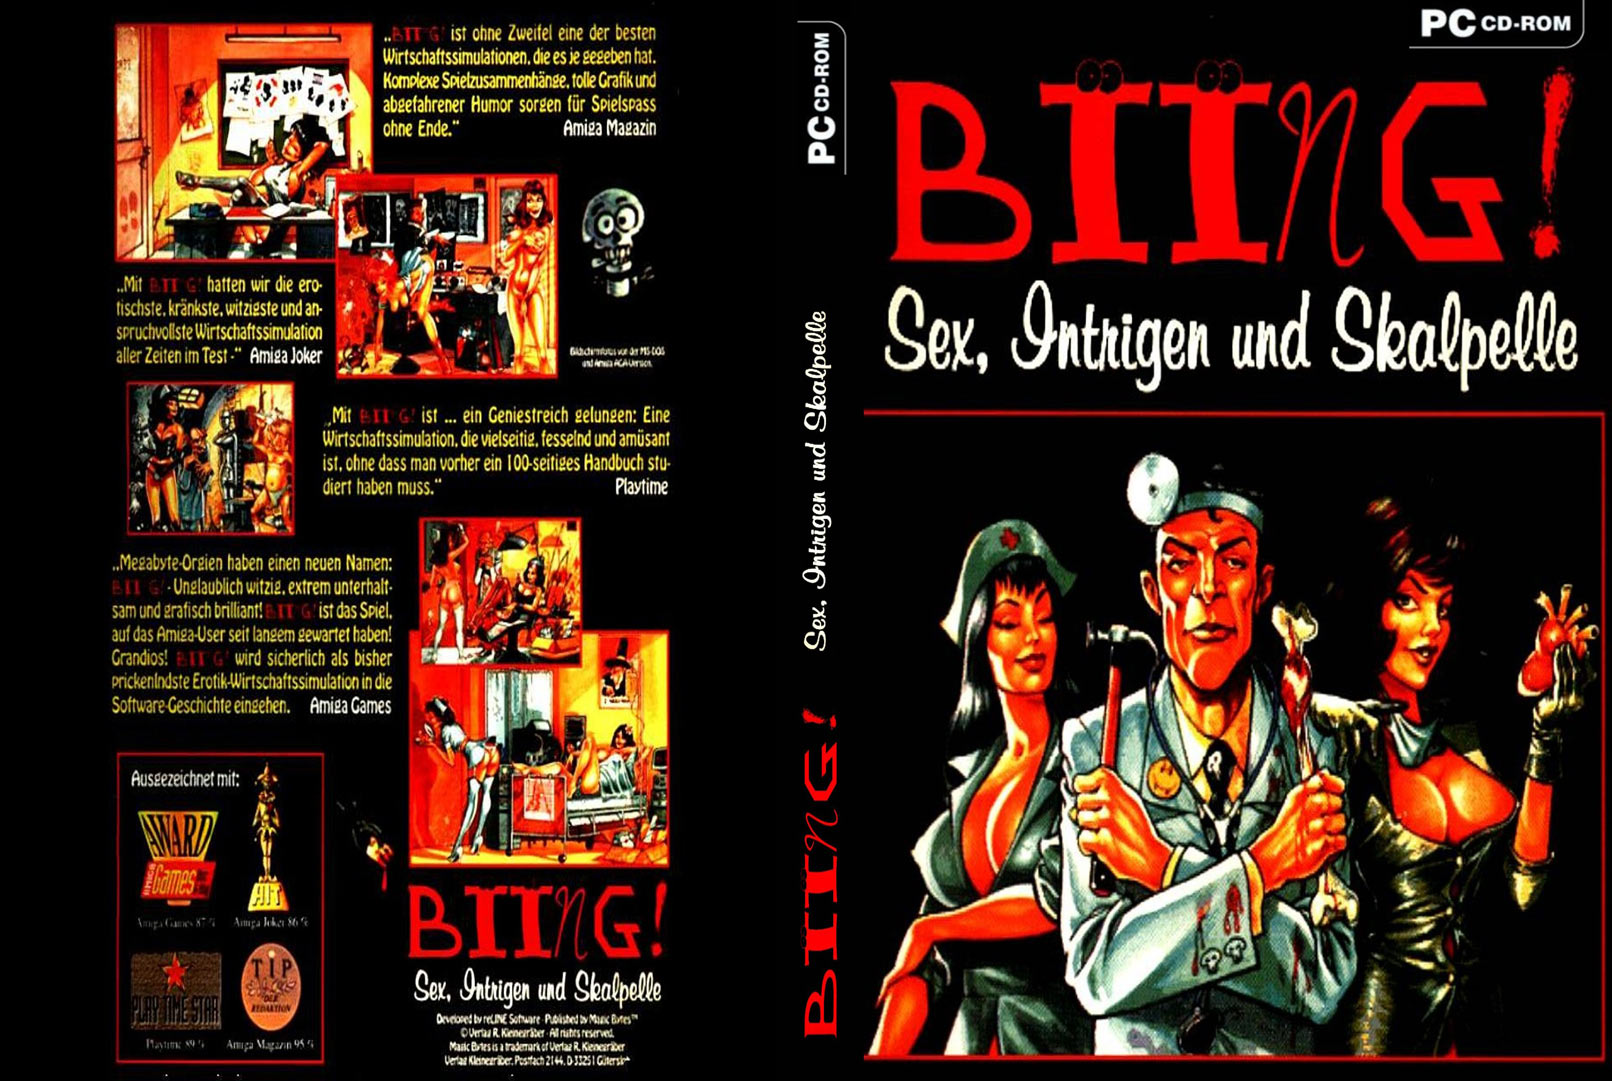 Biing!: Sex, Intrigue and Scalpels - DVD obal